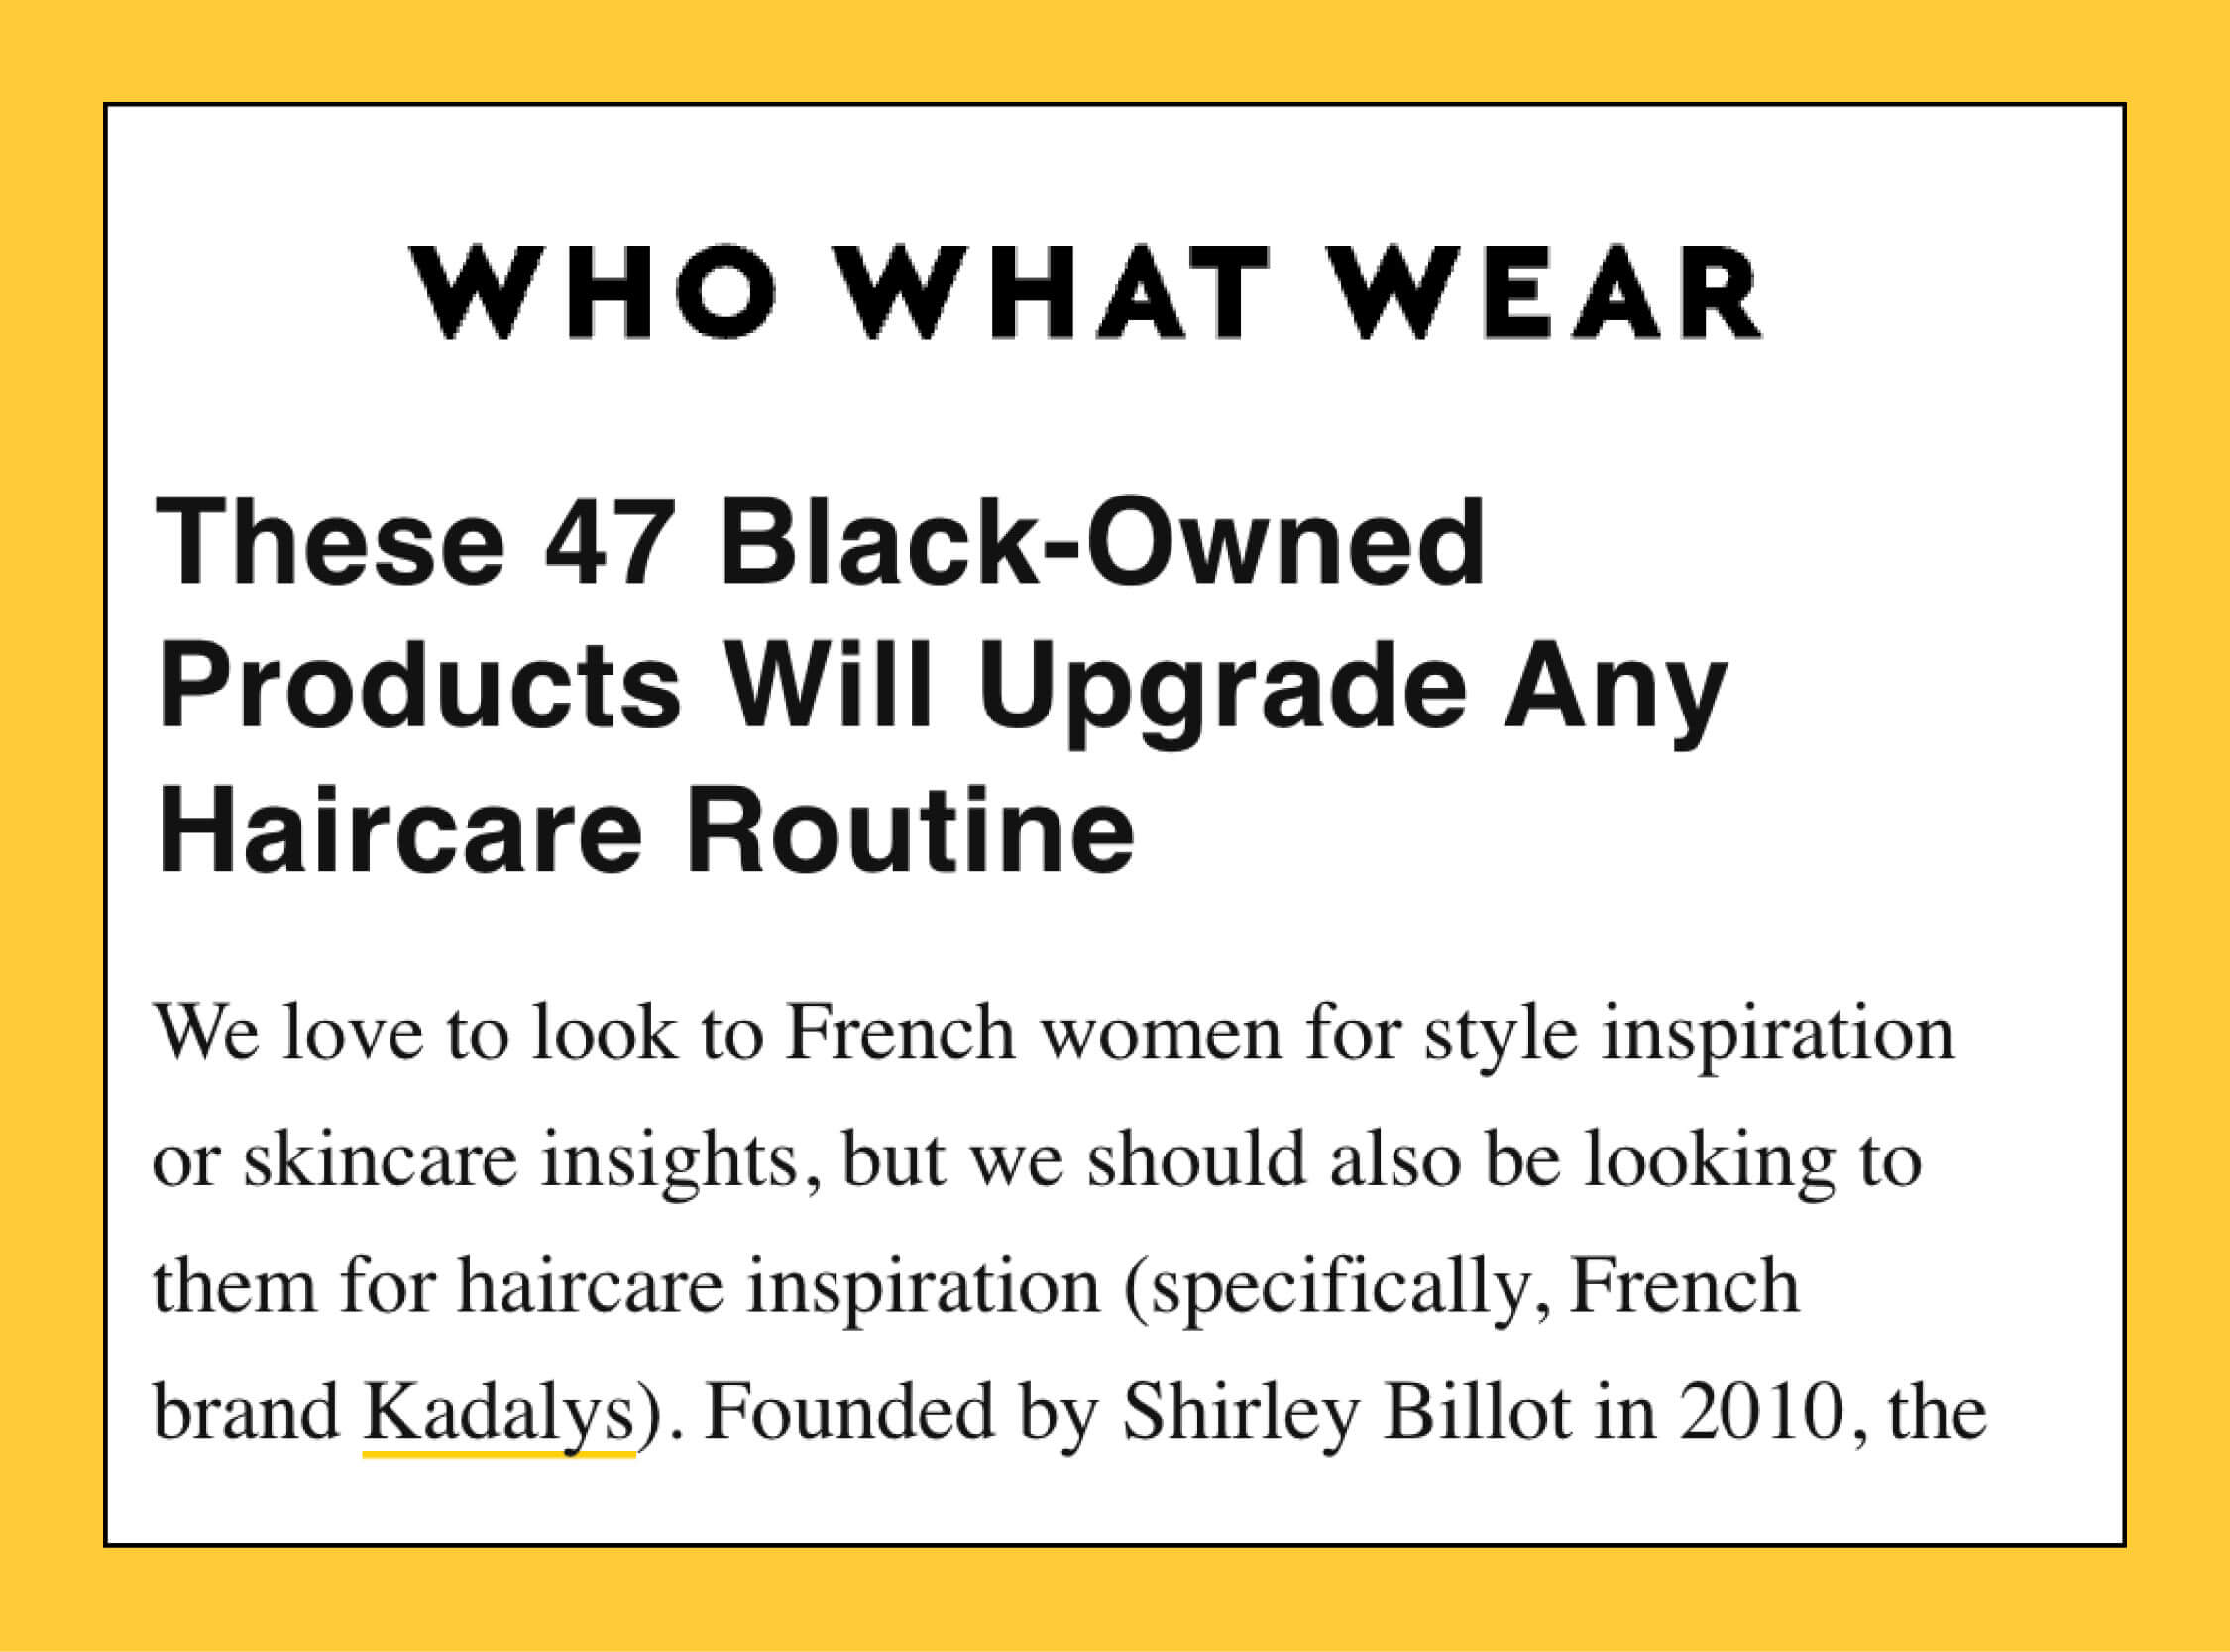 Who What Wear named Kadalys as a Black-Owned product that will upgrade any haircare routine.